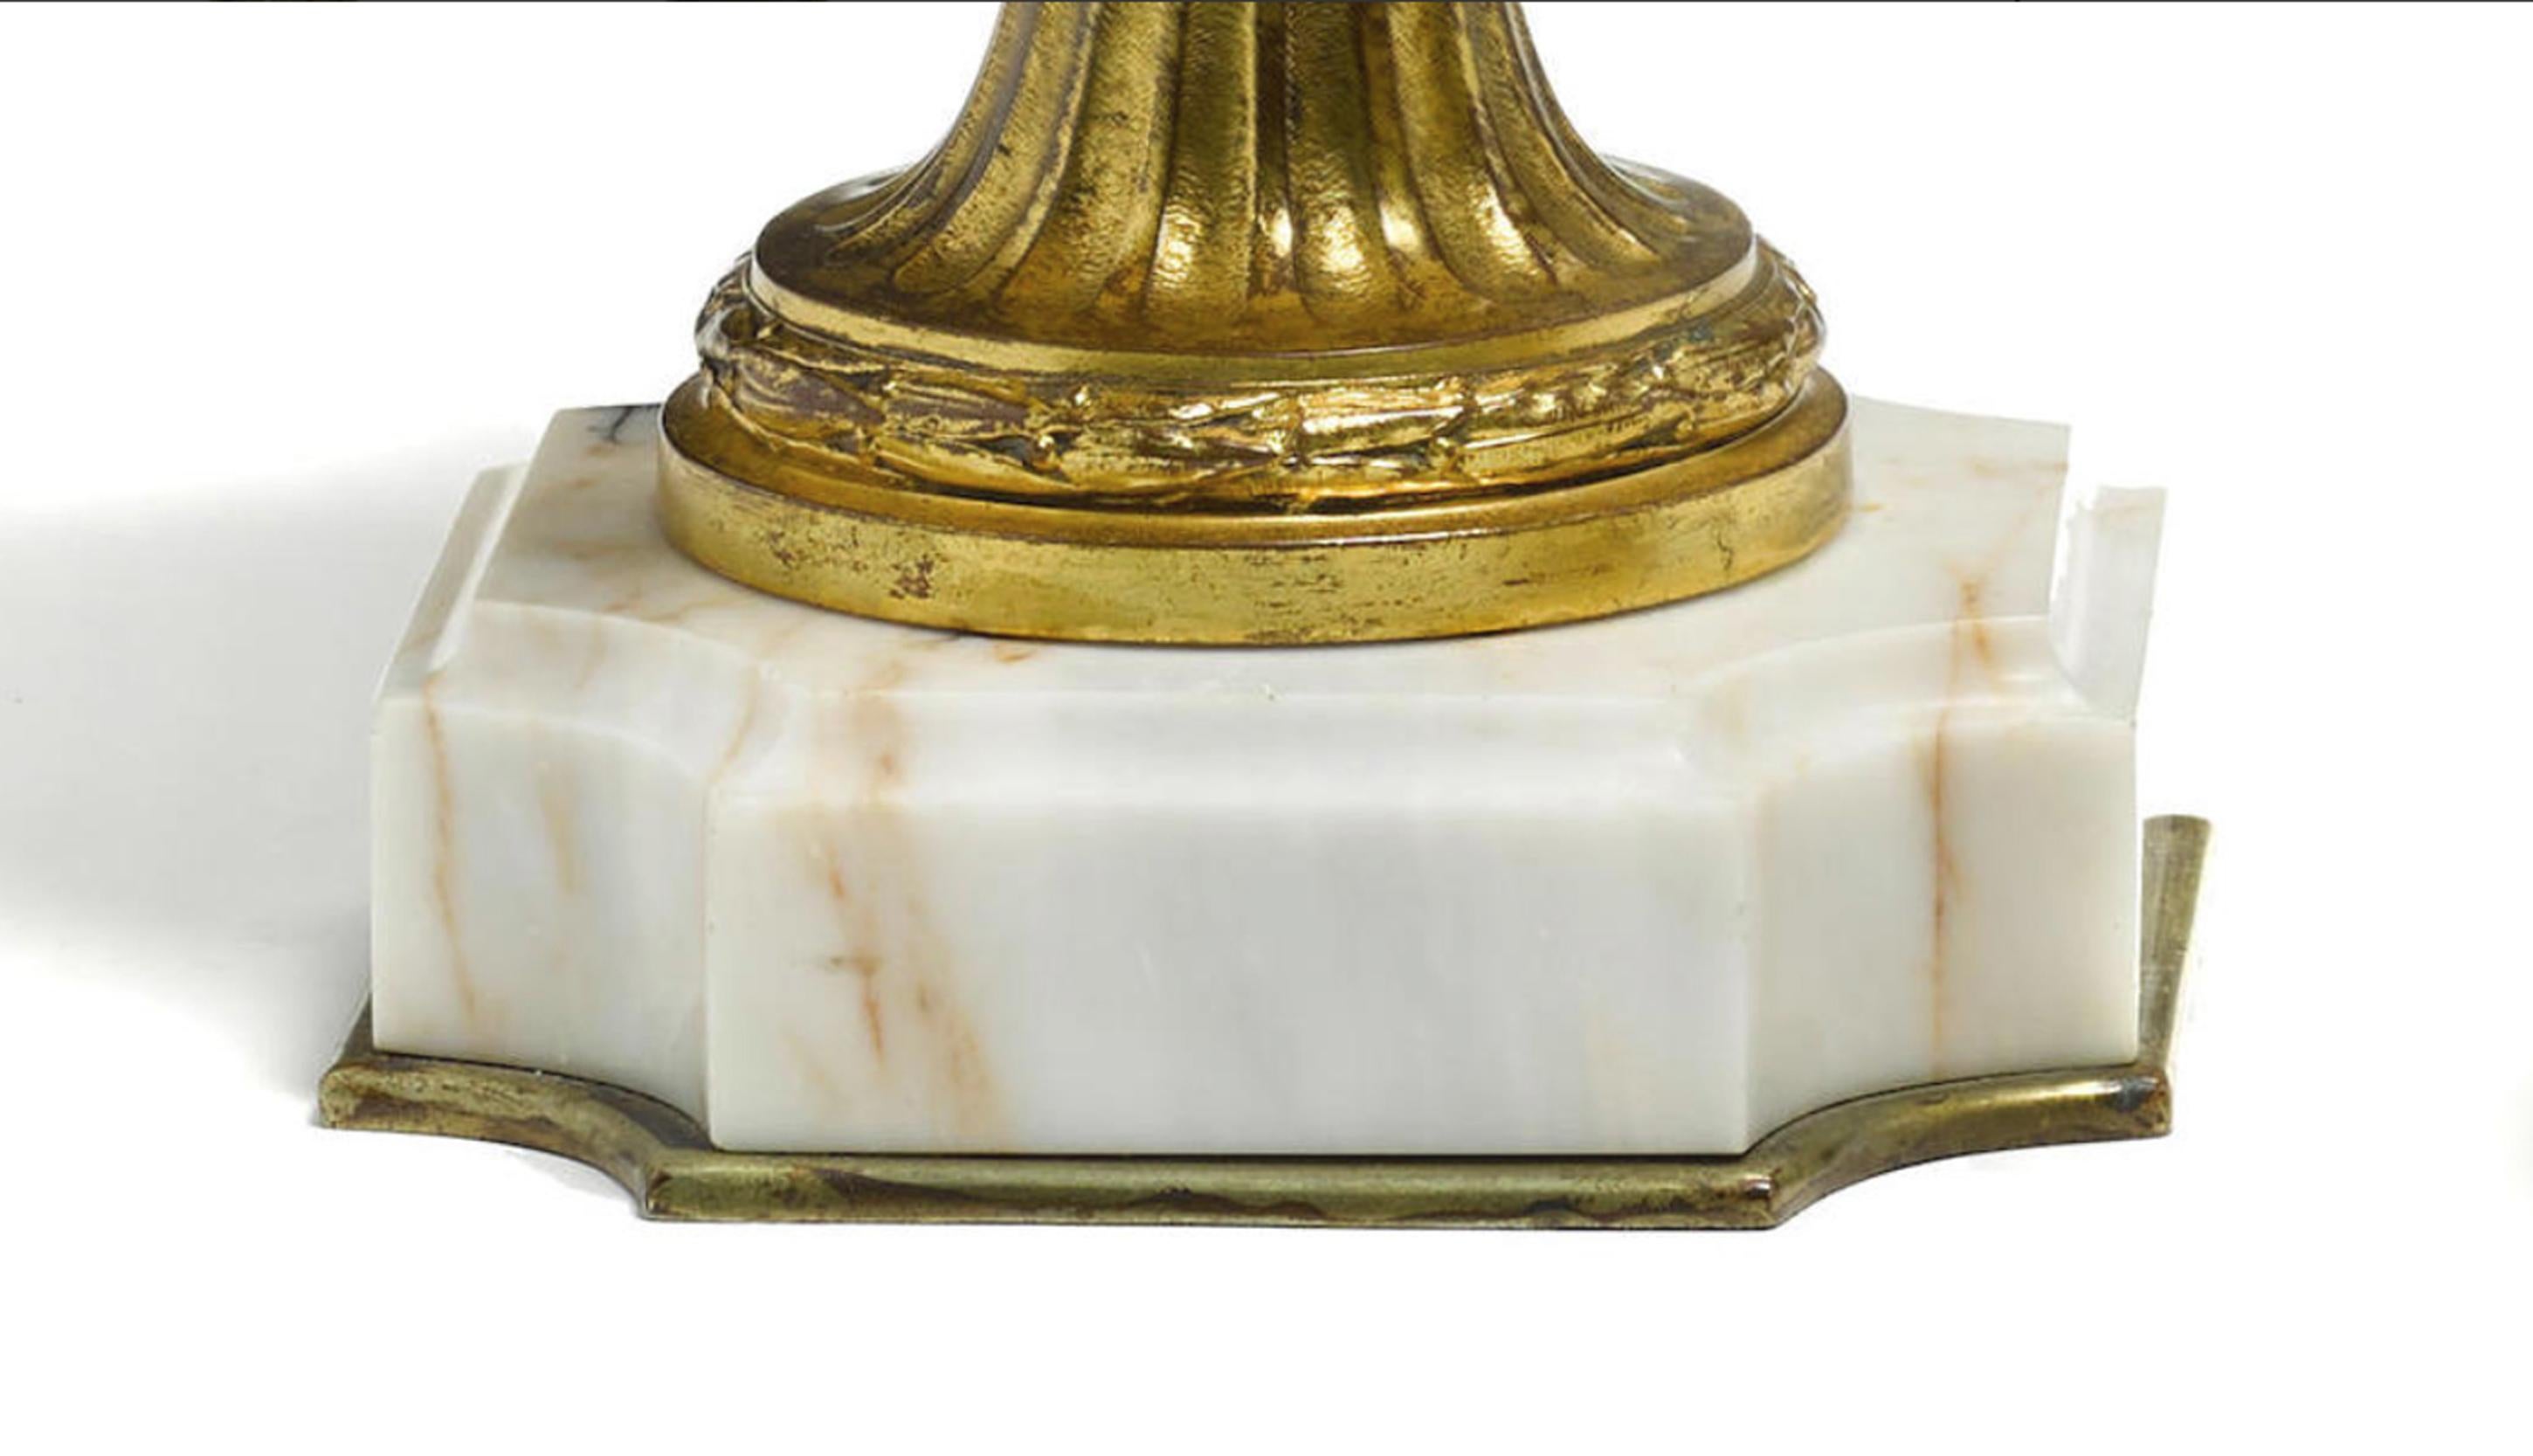 Extremely fine pair of 19th century French Louis XVI style gilt and patinated bronze on marble base.

Each urn is surmounted by an ormolu lid, over a neck mounted scrolling foliate appliqué, above a shaped body with gilt masks, above a gilt bronze